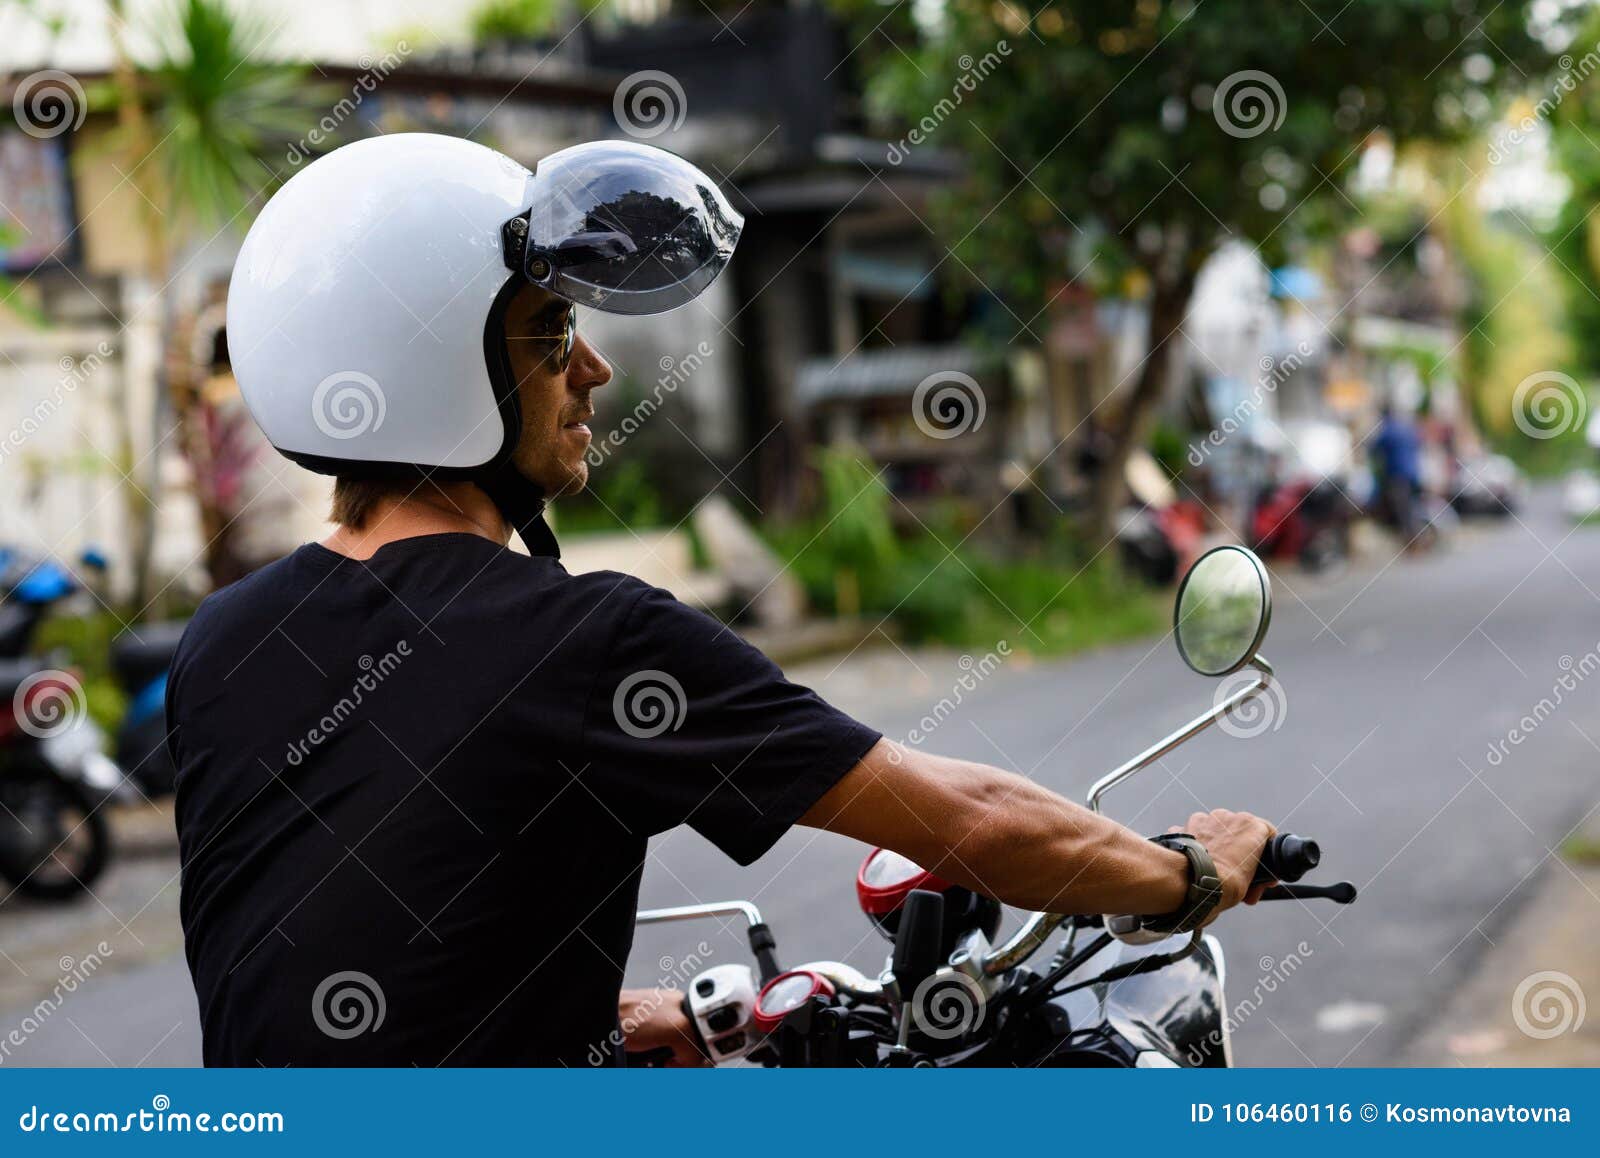 Traveller on a Motorbike on the Road. Man Driving Motorcycle on an